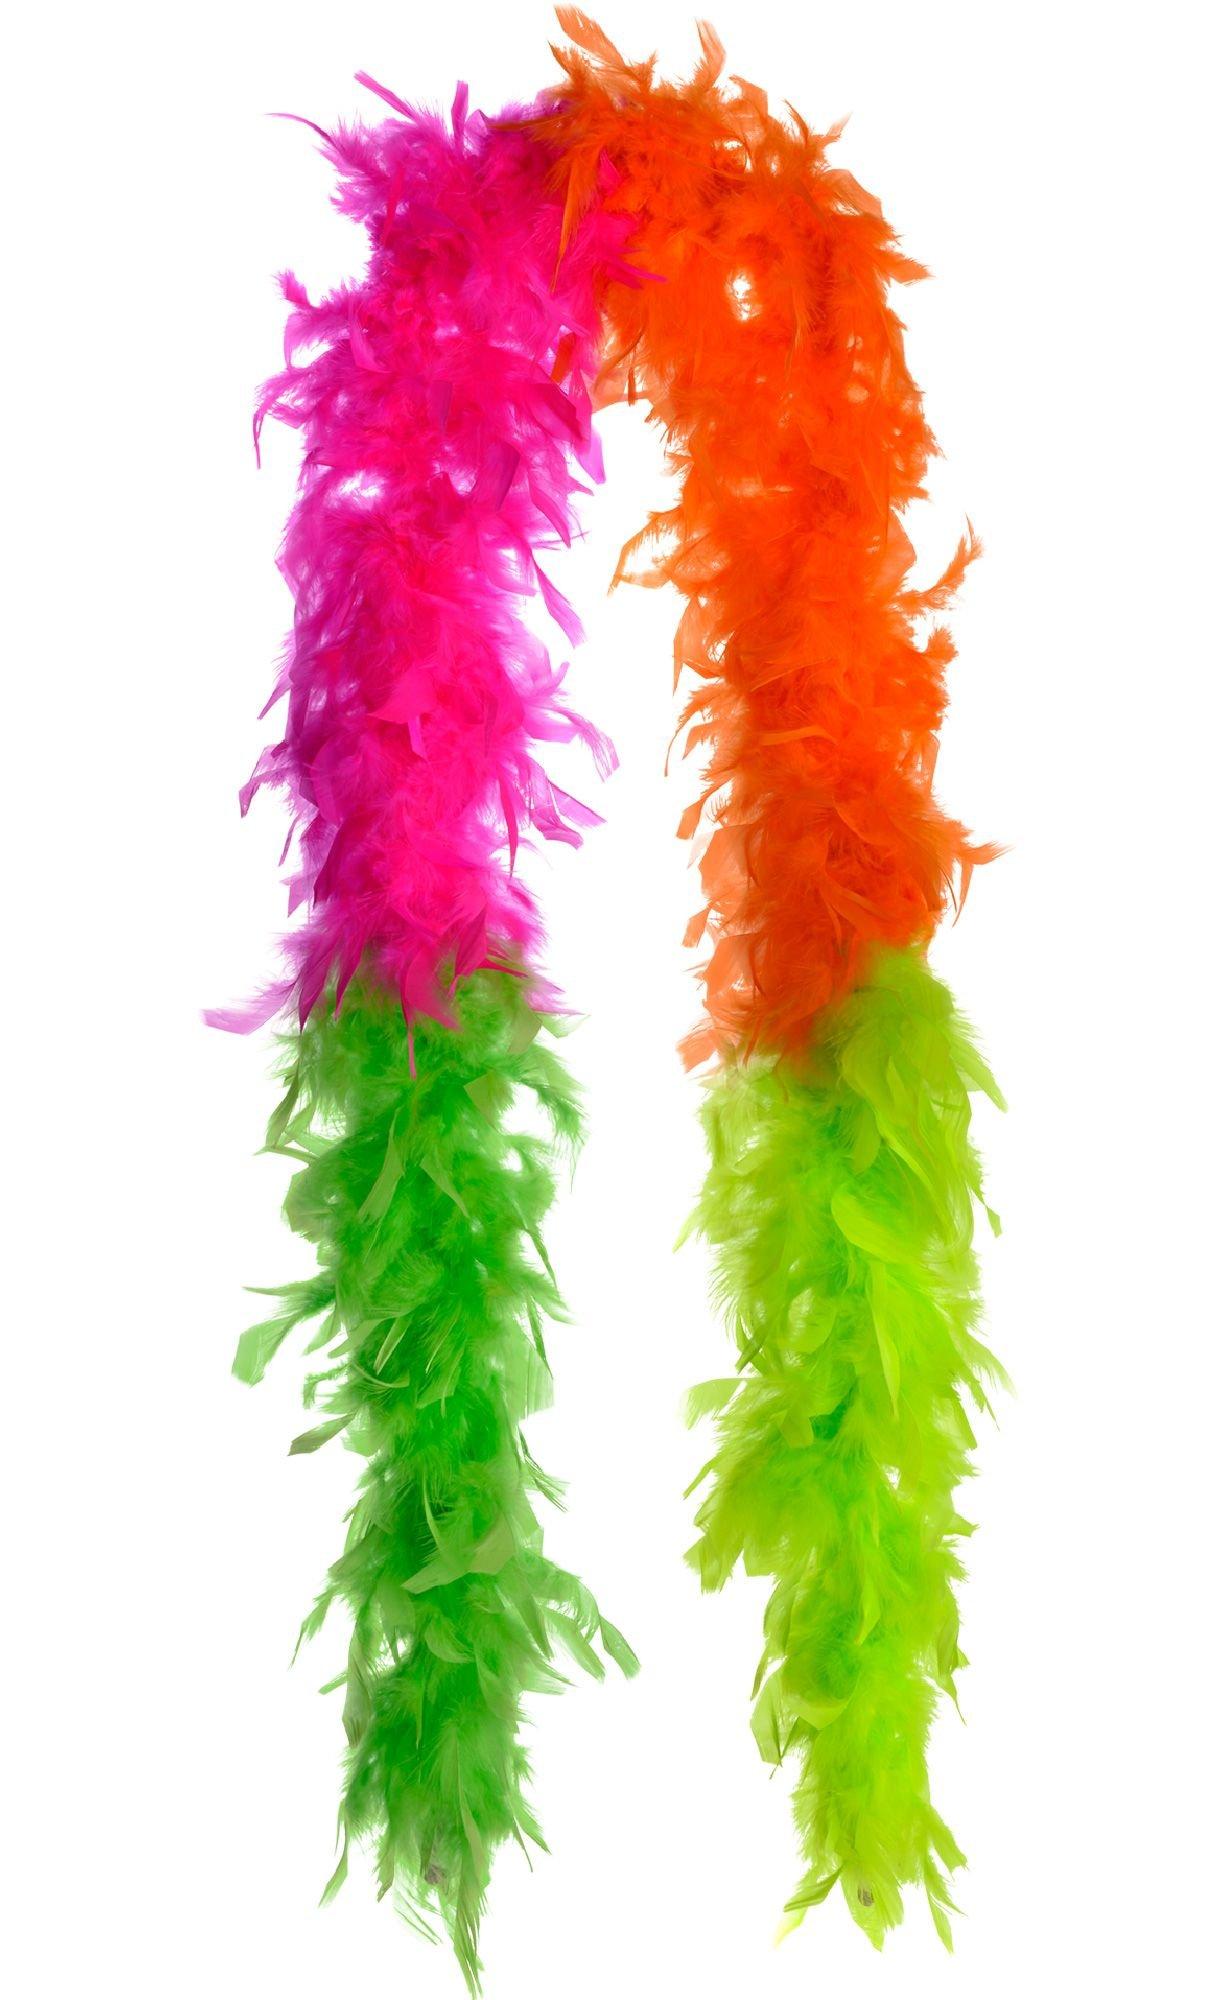 Light Pink Solid Color Feather Boas - Mardi Gras Creations